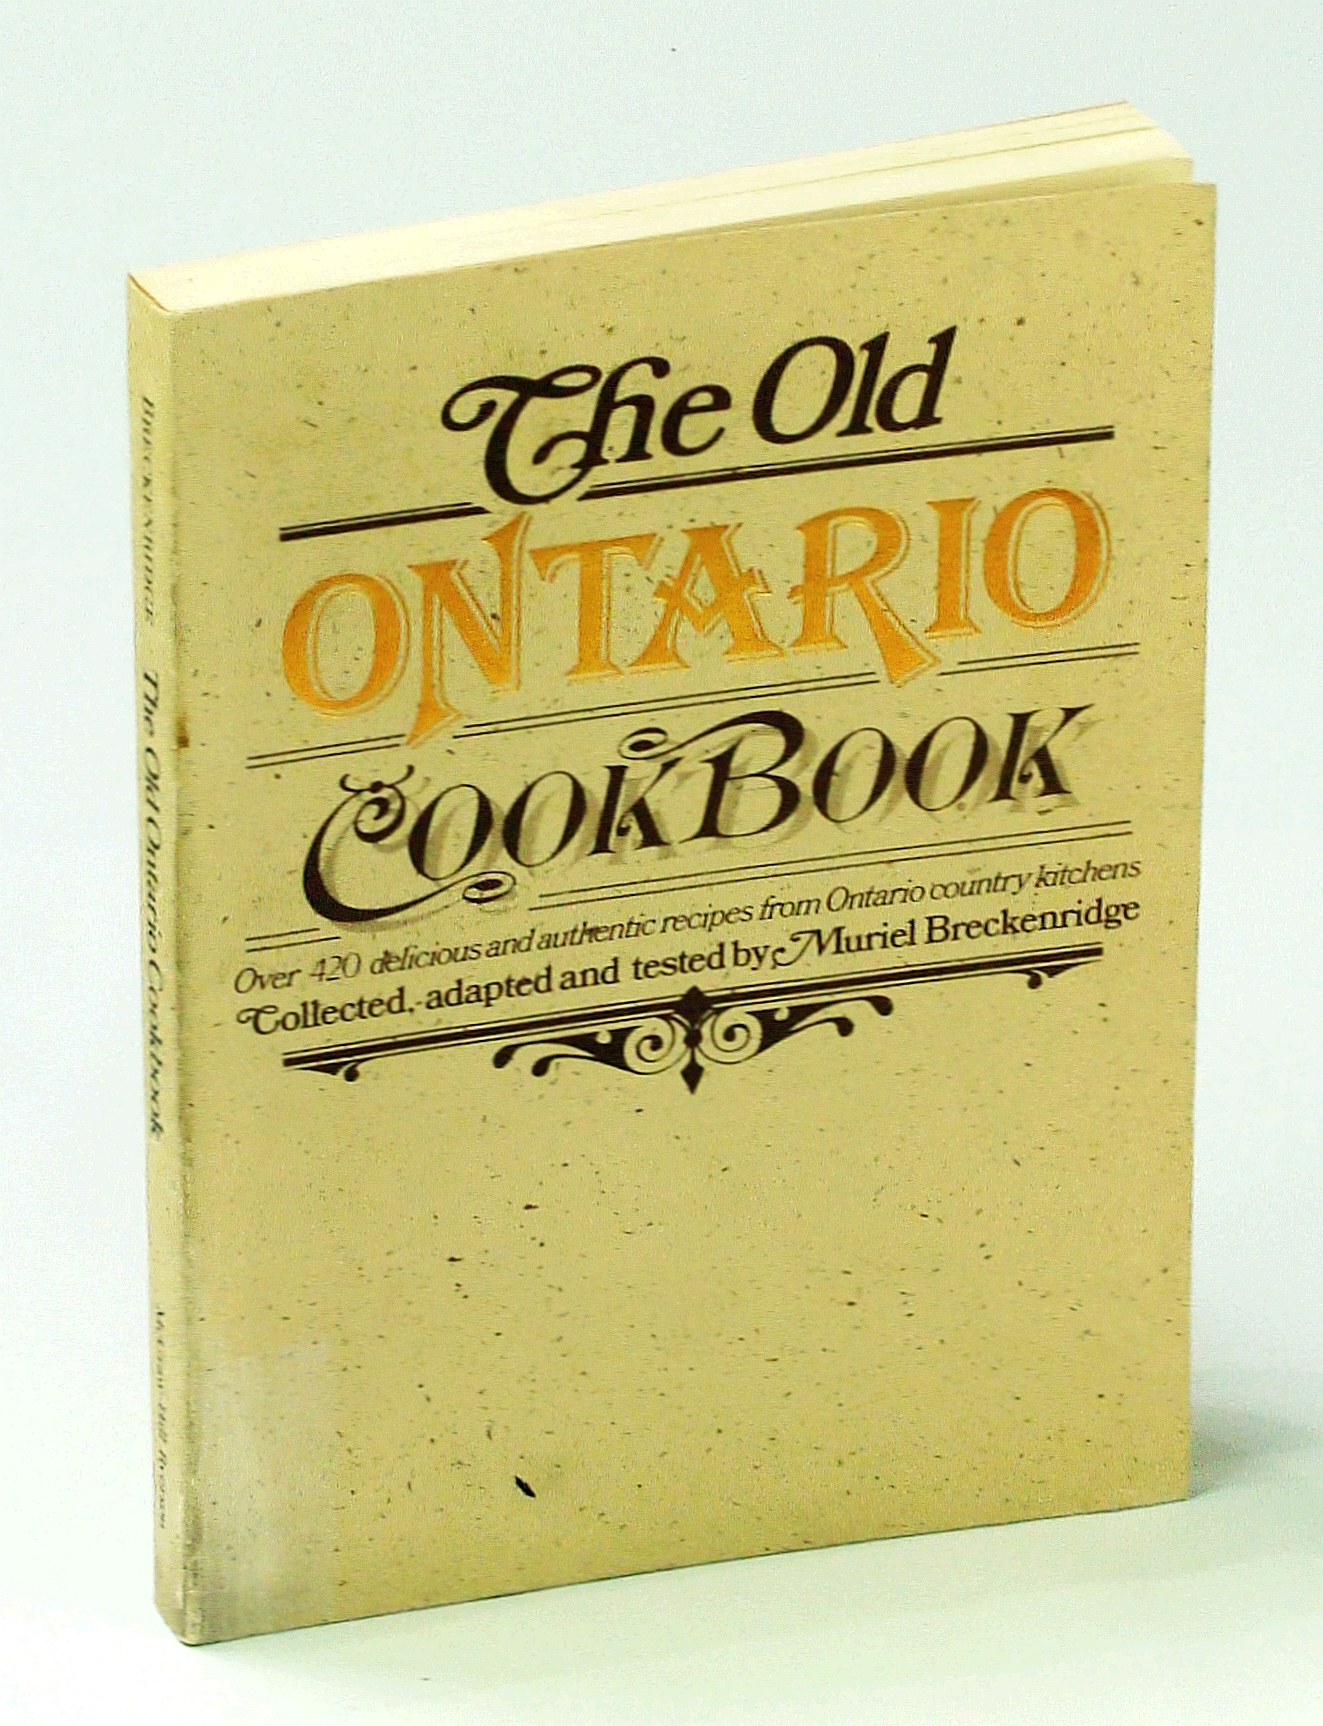 Image for The Old Ontario Cookbook: Over 400 Delicious and Authentic Recipes From Ontario Country Kitchens